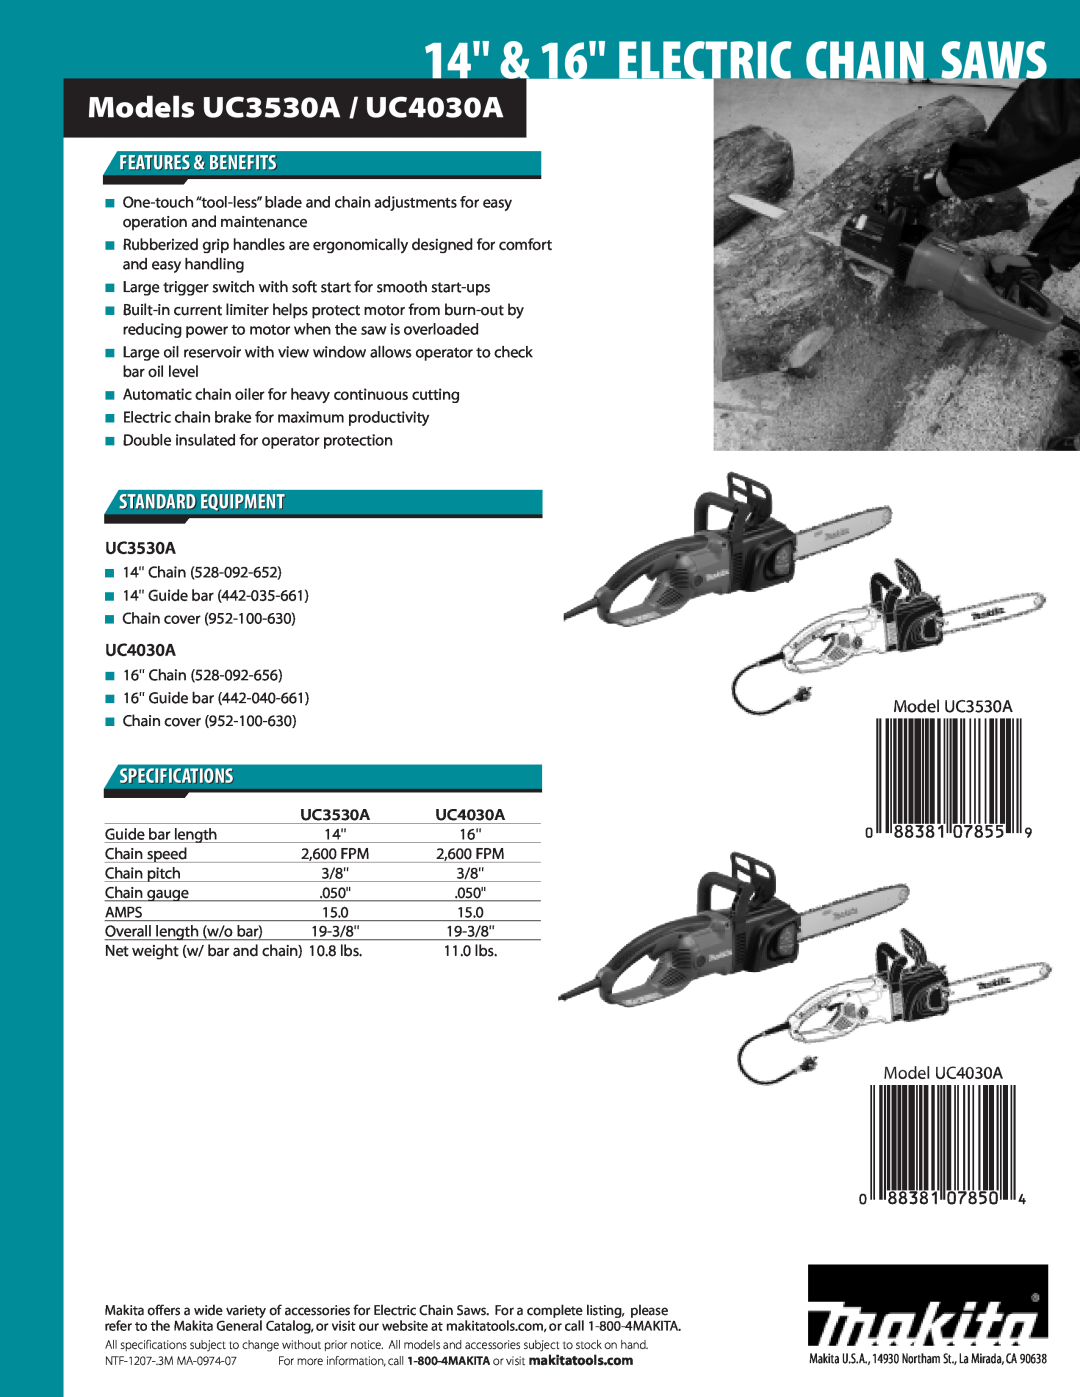 Makita UC4030A (16") manual 14 & 16 ELECTRIC CHAIN SAWS, Models UC3530A / UC4030A, Features & Benefits, Standard Equipment 